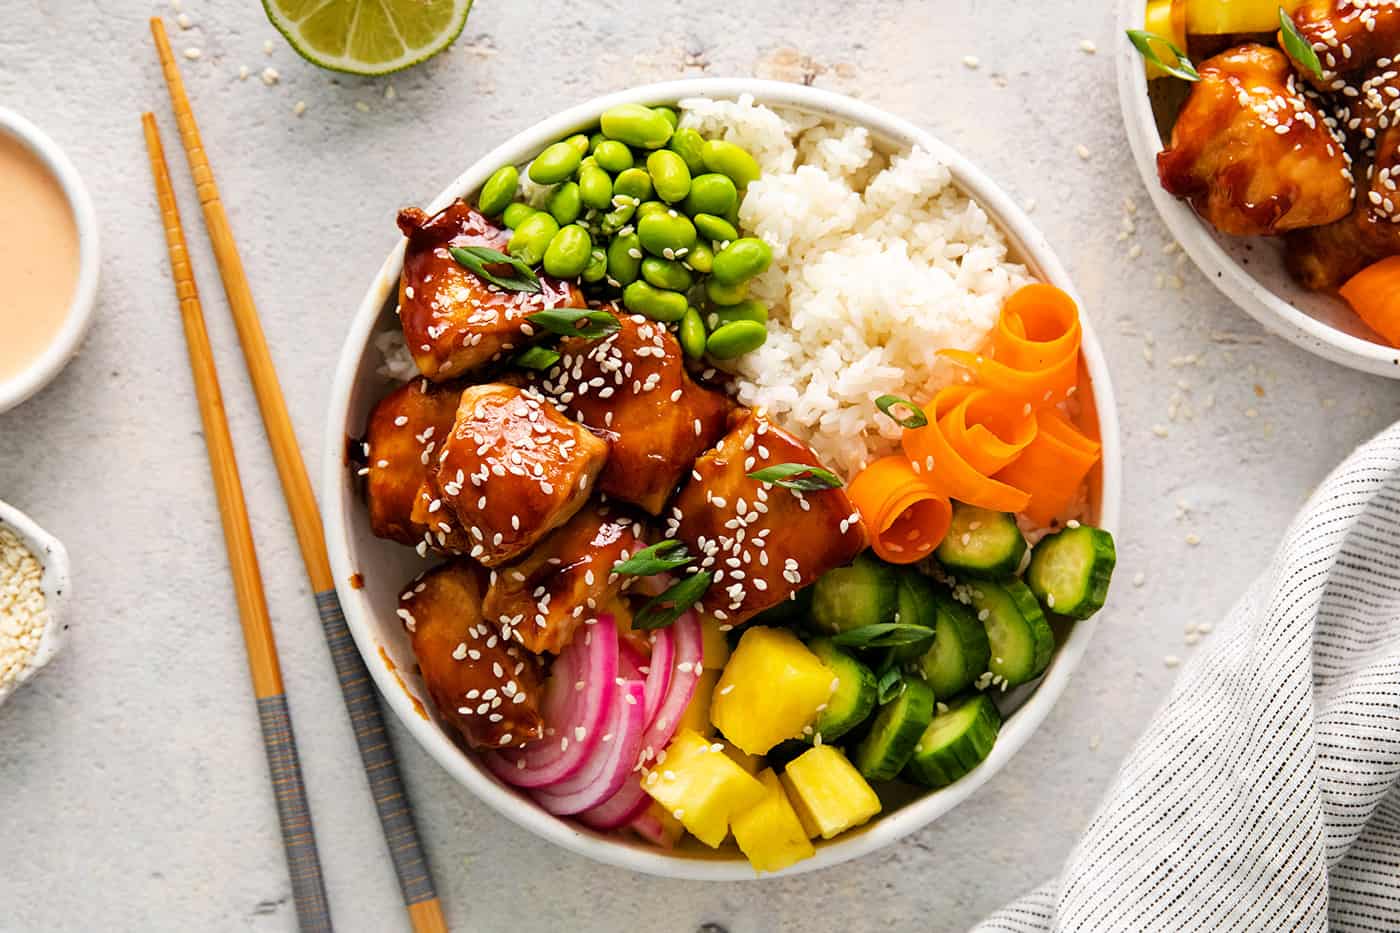 Overhead view of a teriyaki chicken poke bowl topped with fresh veggies